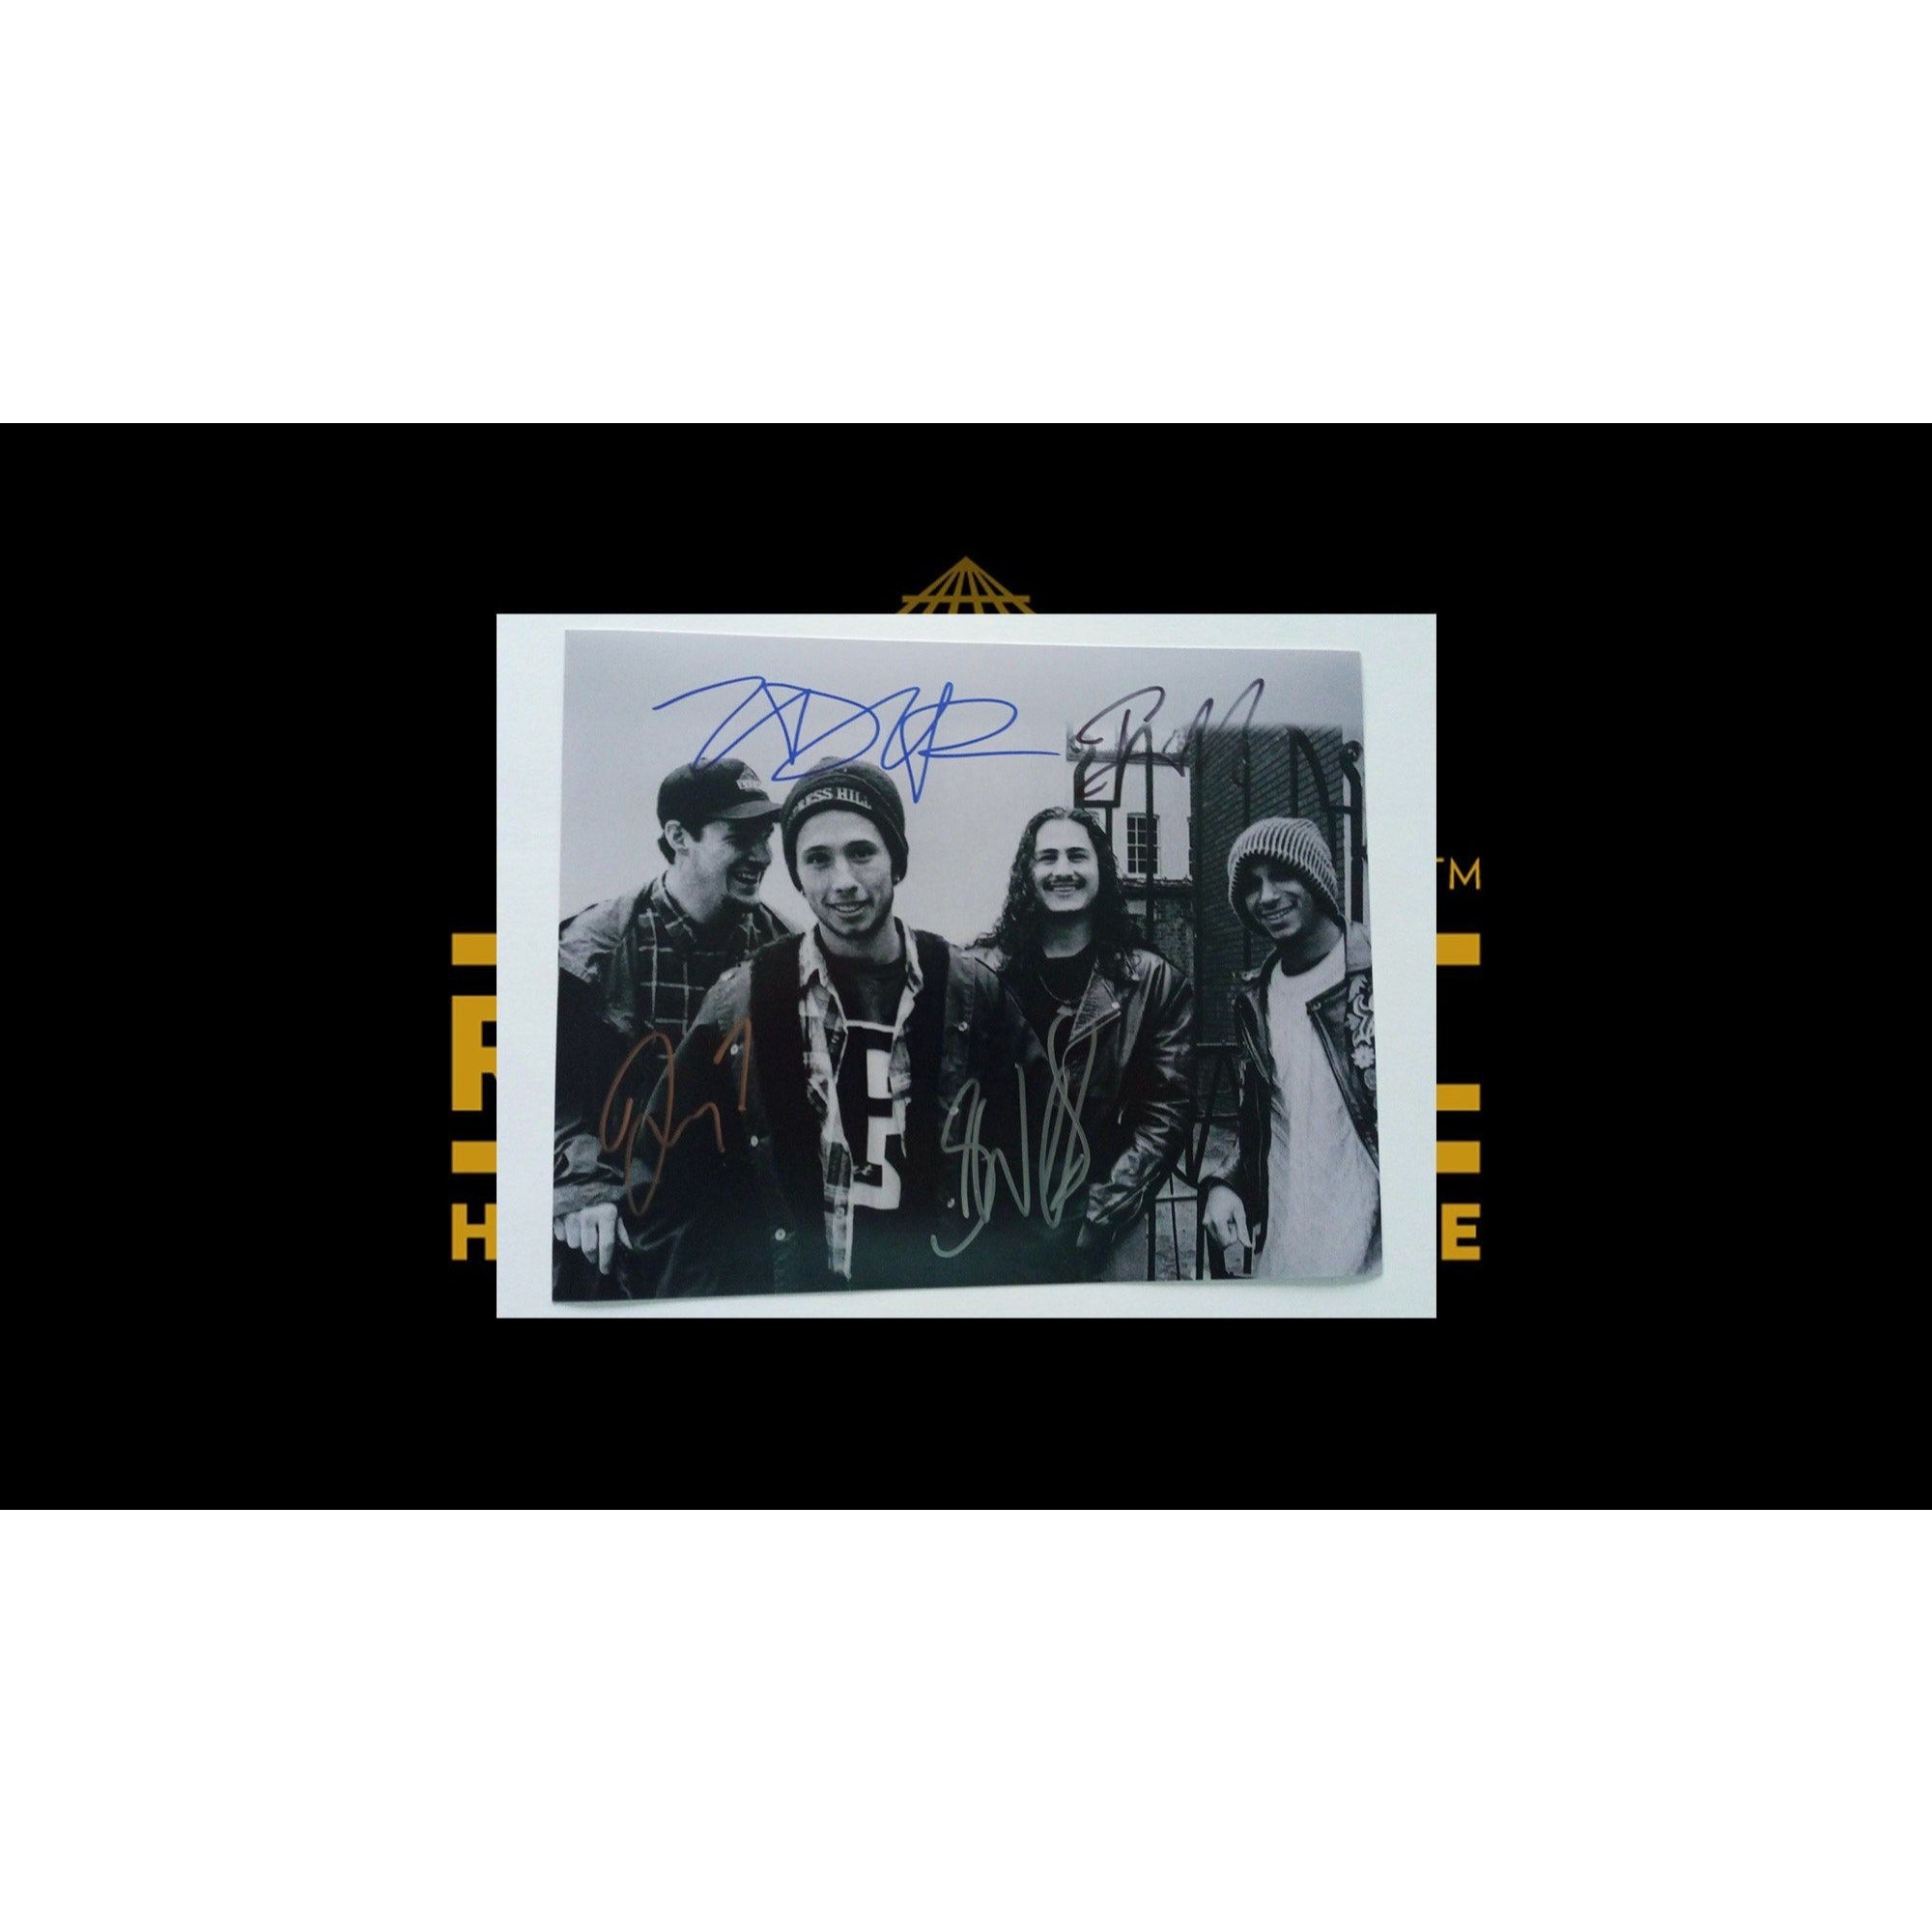 Zack Dela Rocha Tom Morello Rage Against the Machine 8 by 10 signed photo with proof